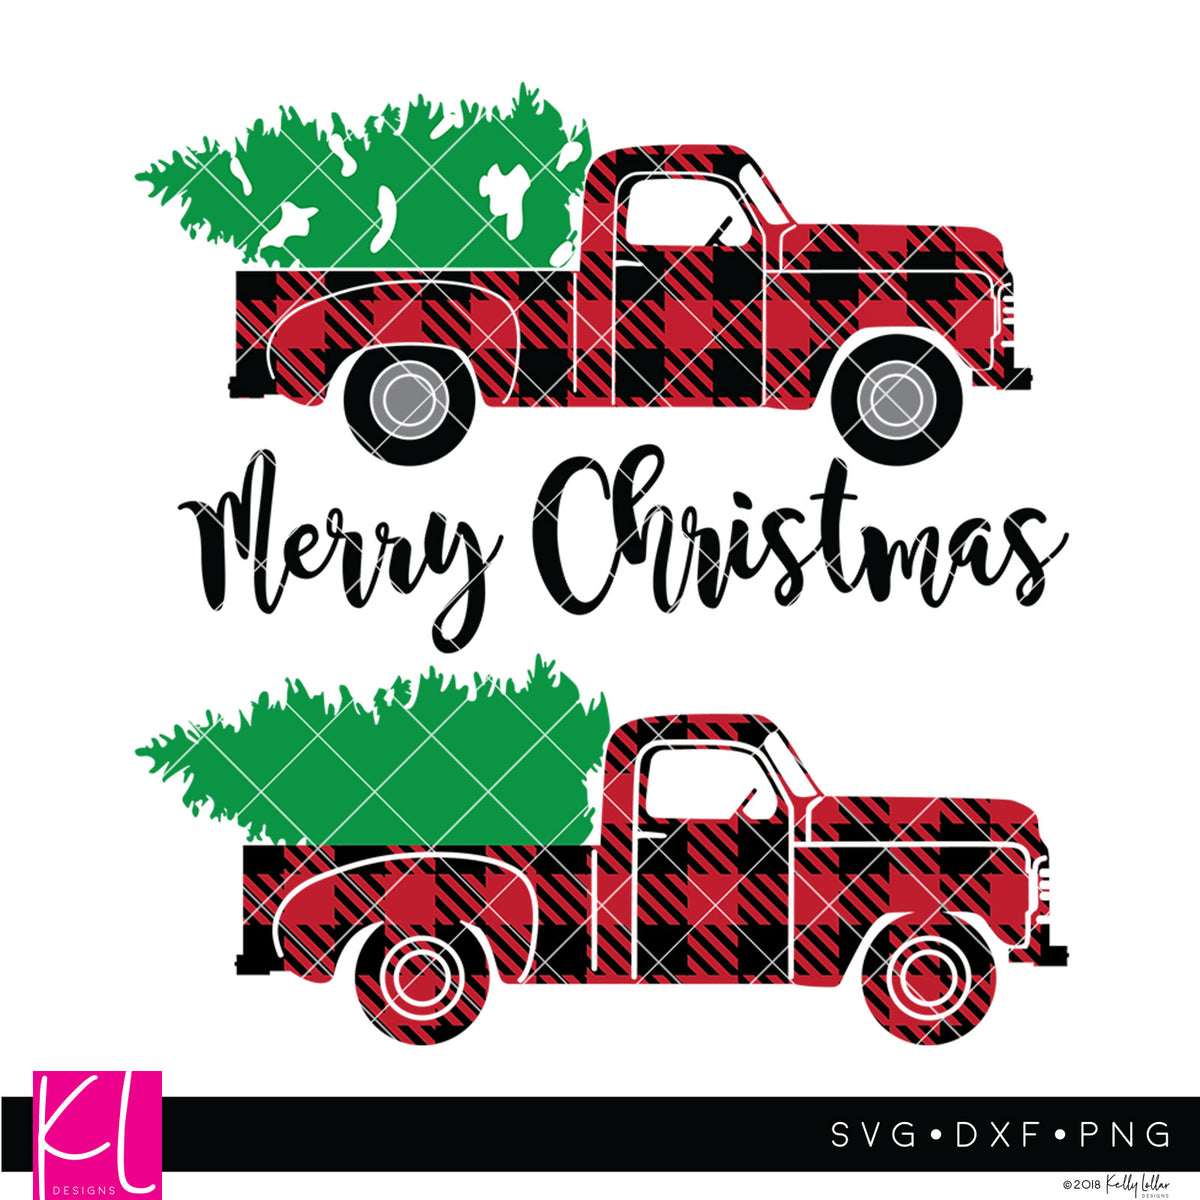 Buffalo Plaid svg pack of the Vintage Red Christmas Truck - 3 versions included